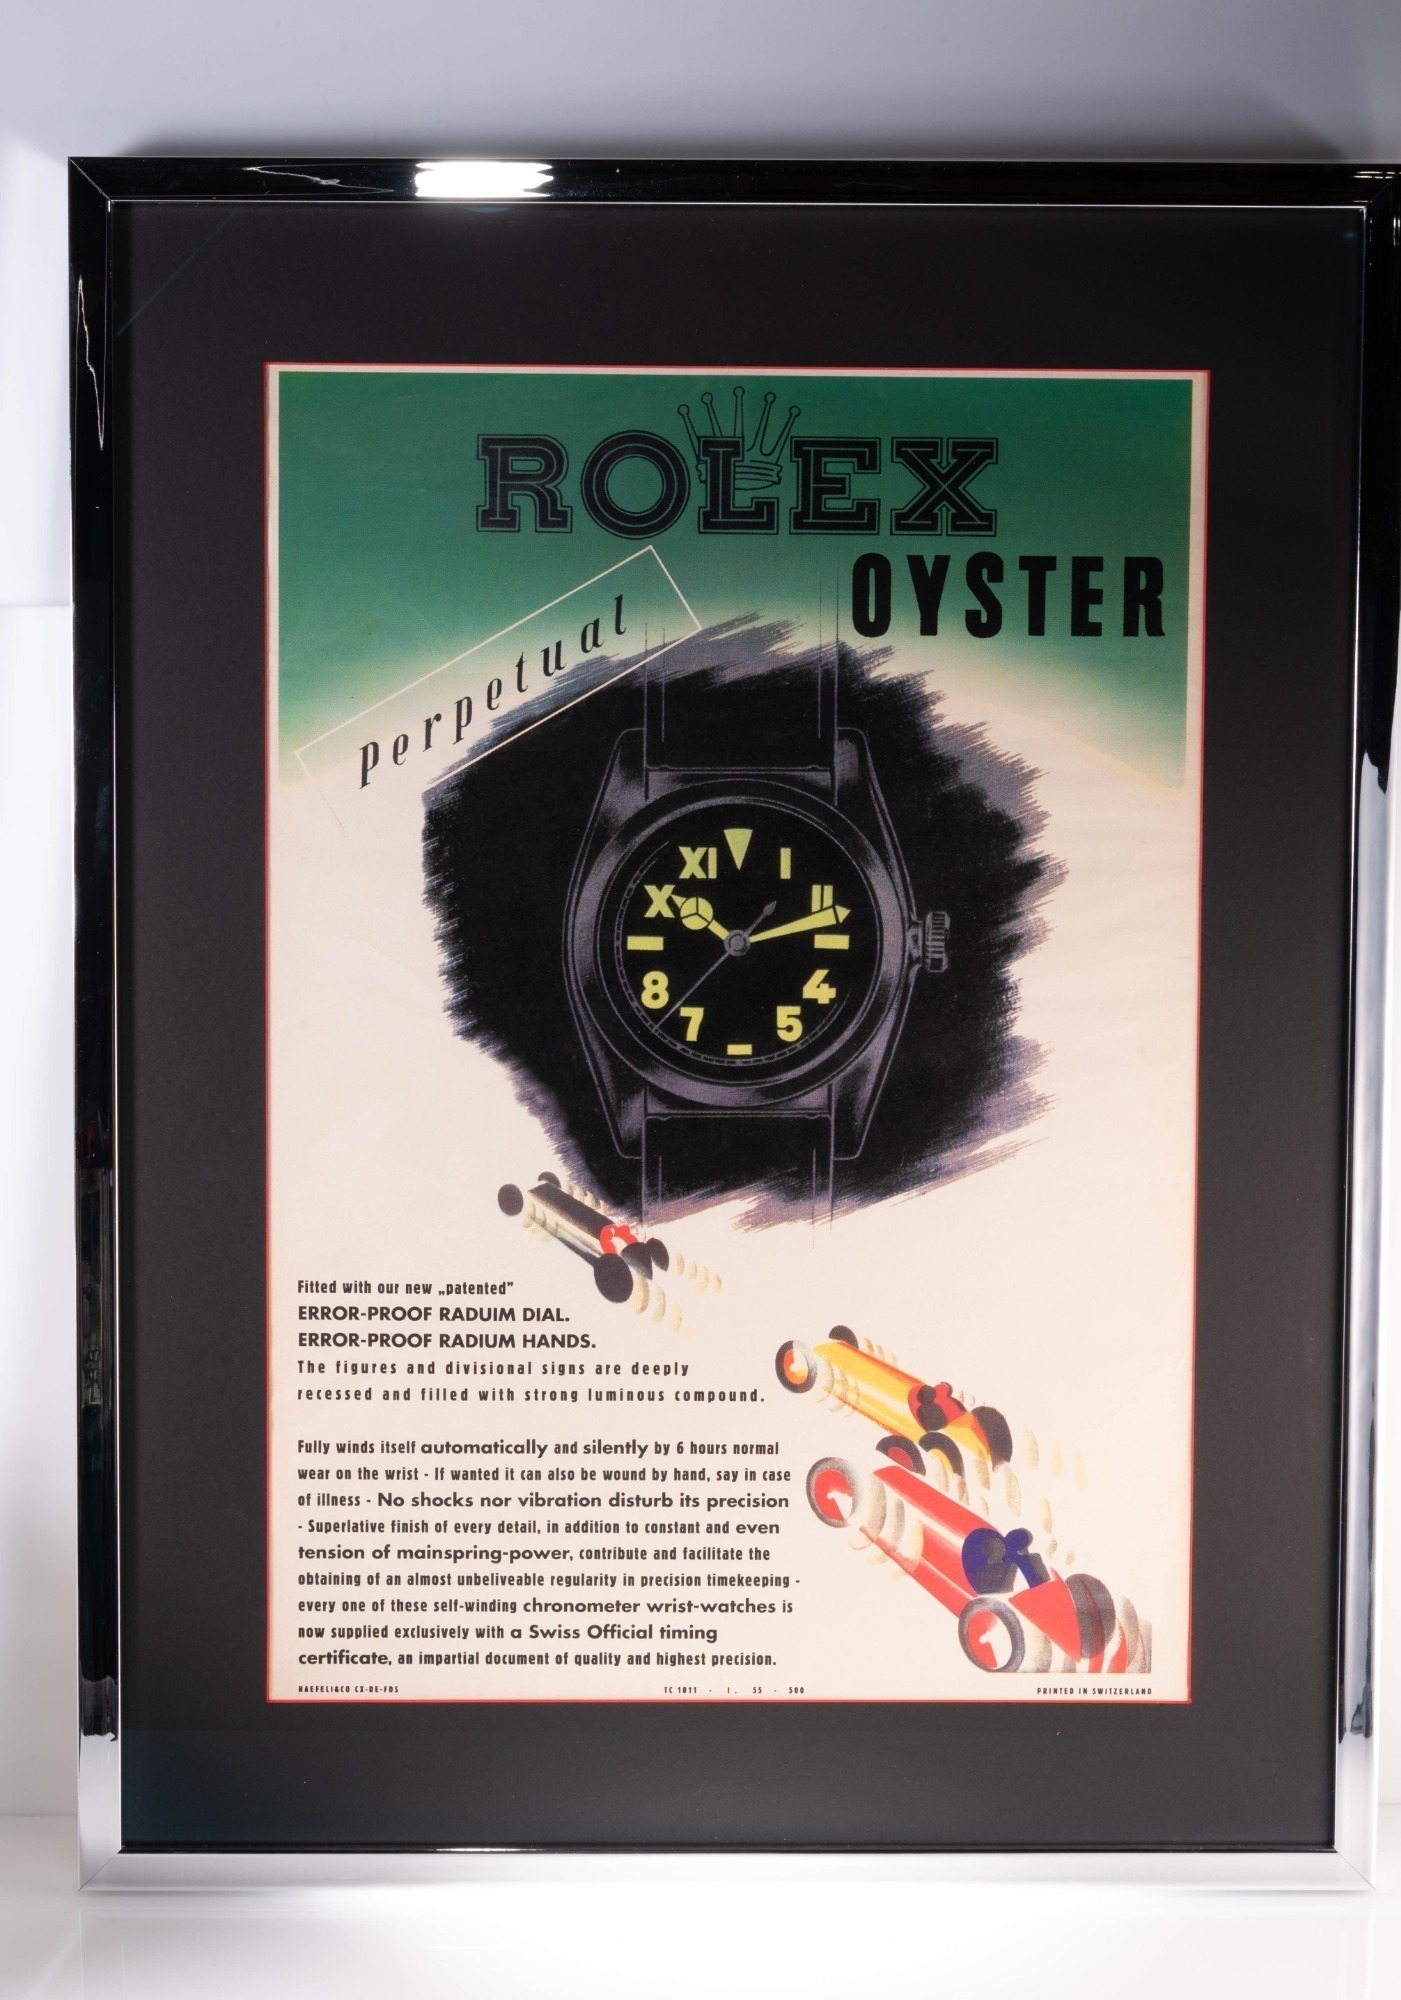 RARE ROLEX OYSTER PERPETUAL ERROR PROOF WATCH ADVERTISING POSTER